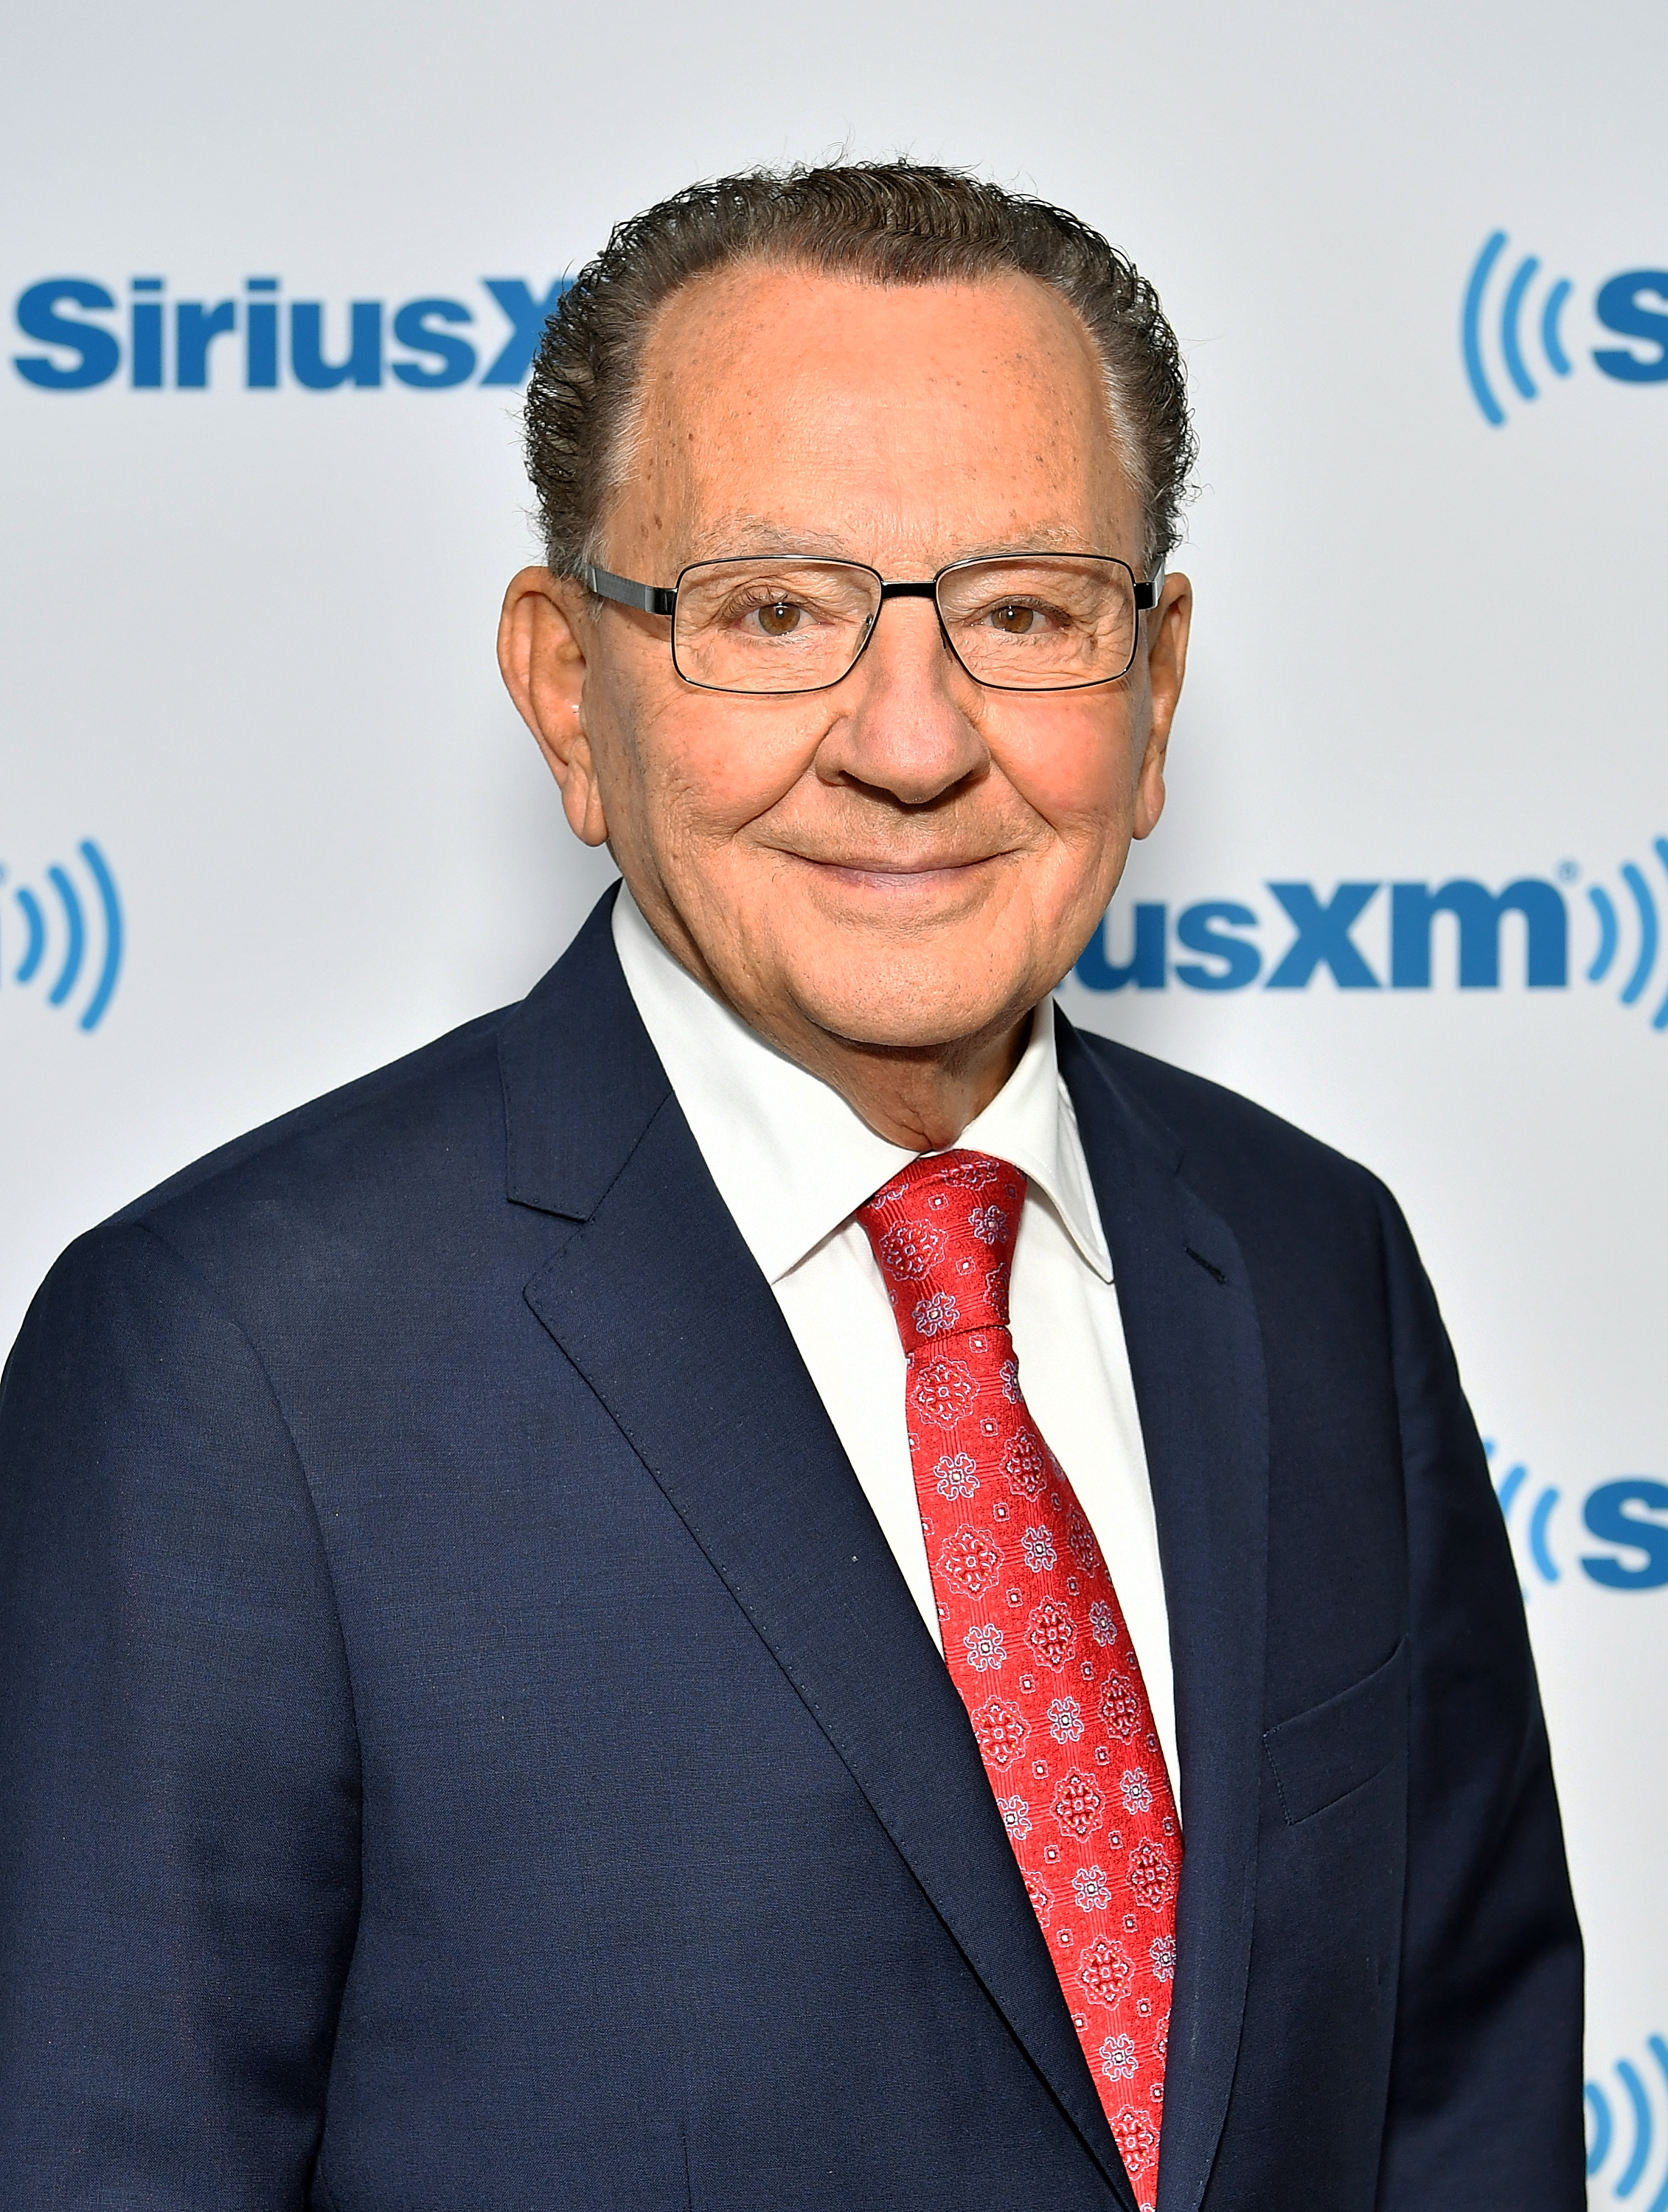 Frank Caprio at SiriusXM Studios in New York City on September 20, 2018 | Source: Getty Images